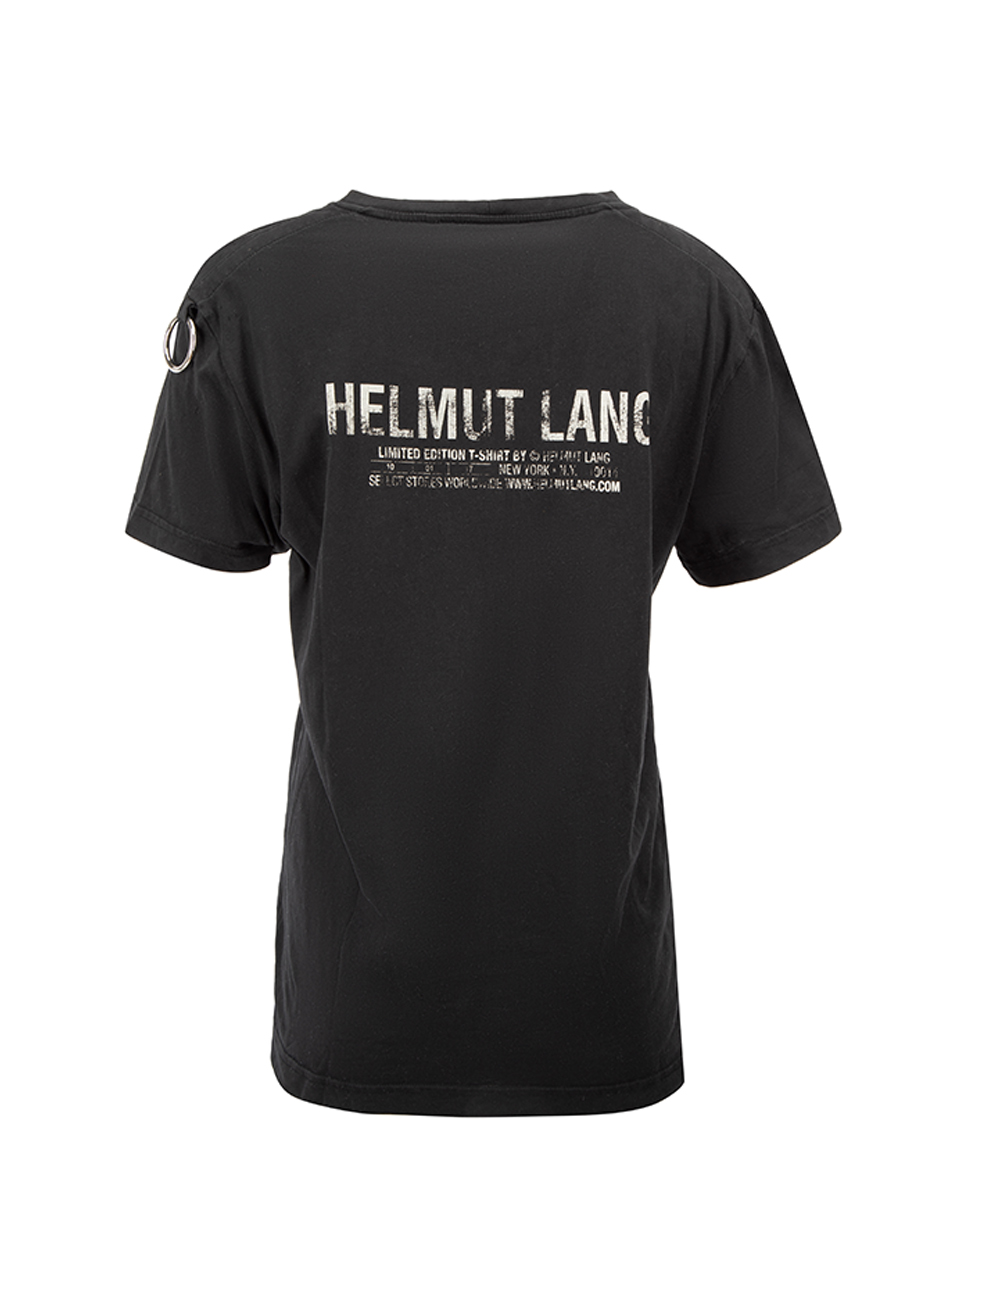 helmut lang limited edition t shirt